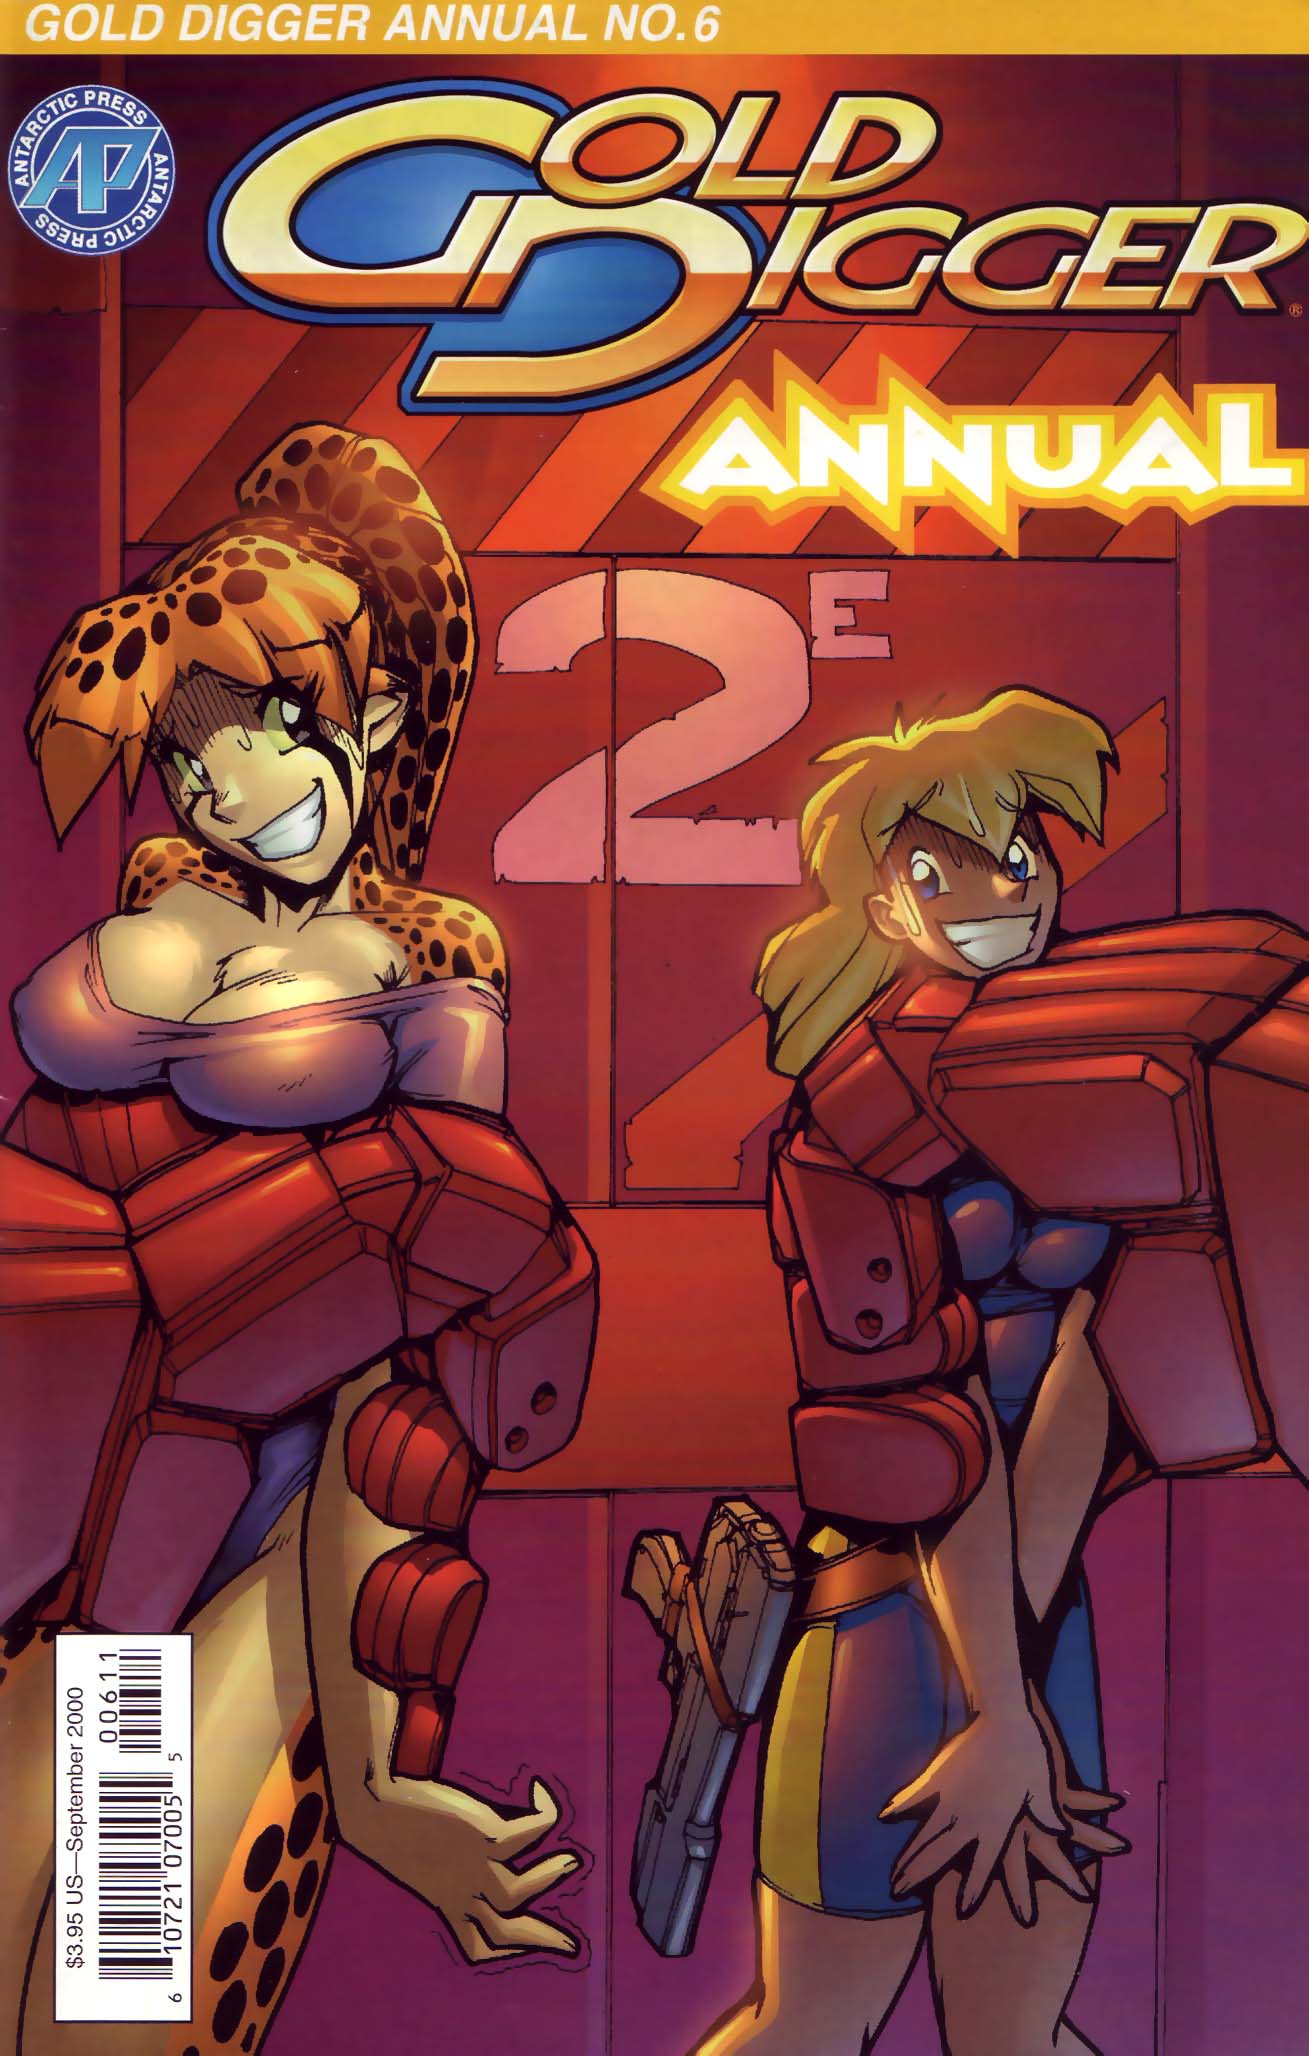 Read online Gold Digger Annual comic -  Issue #6 - 1